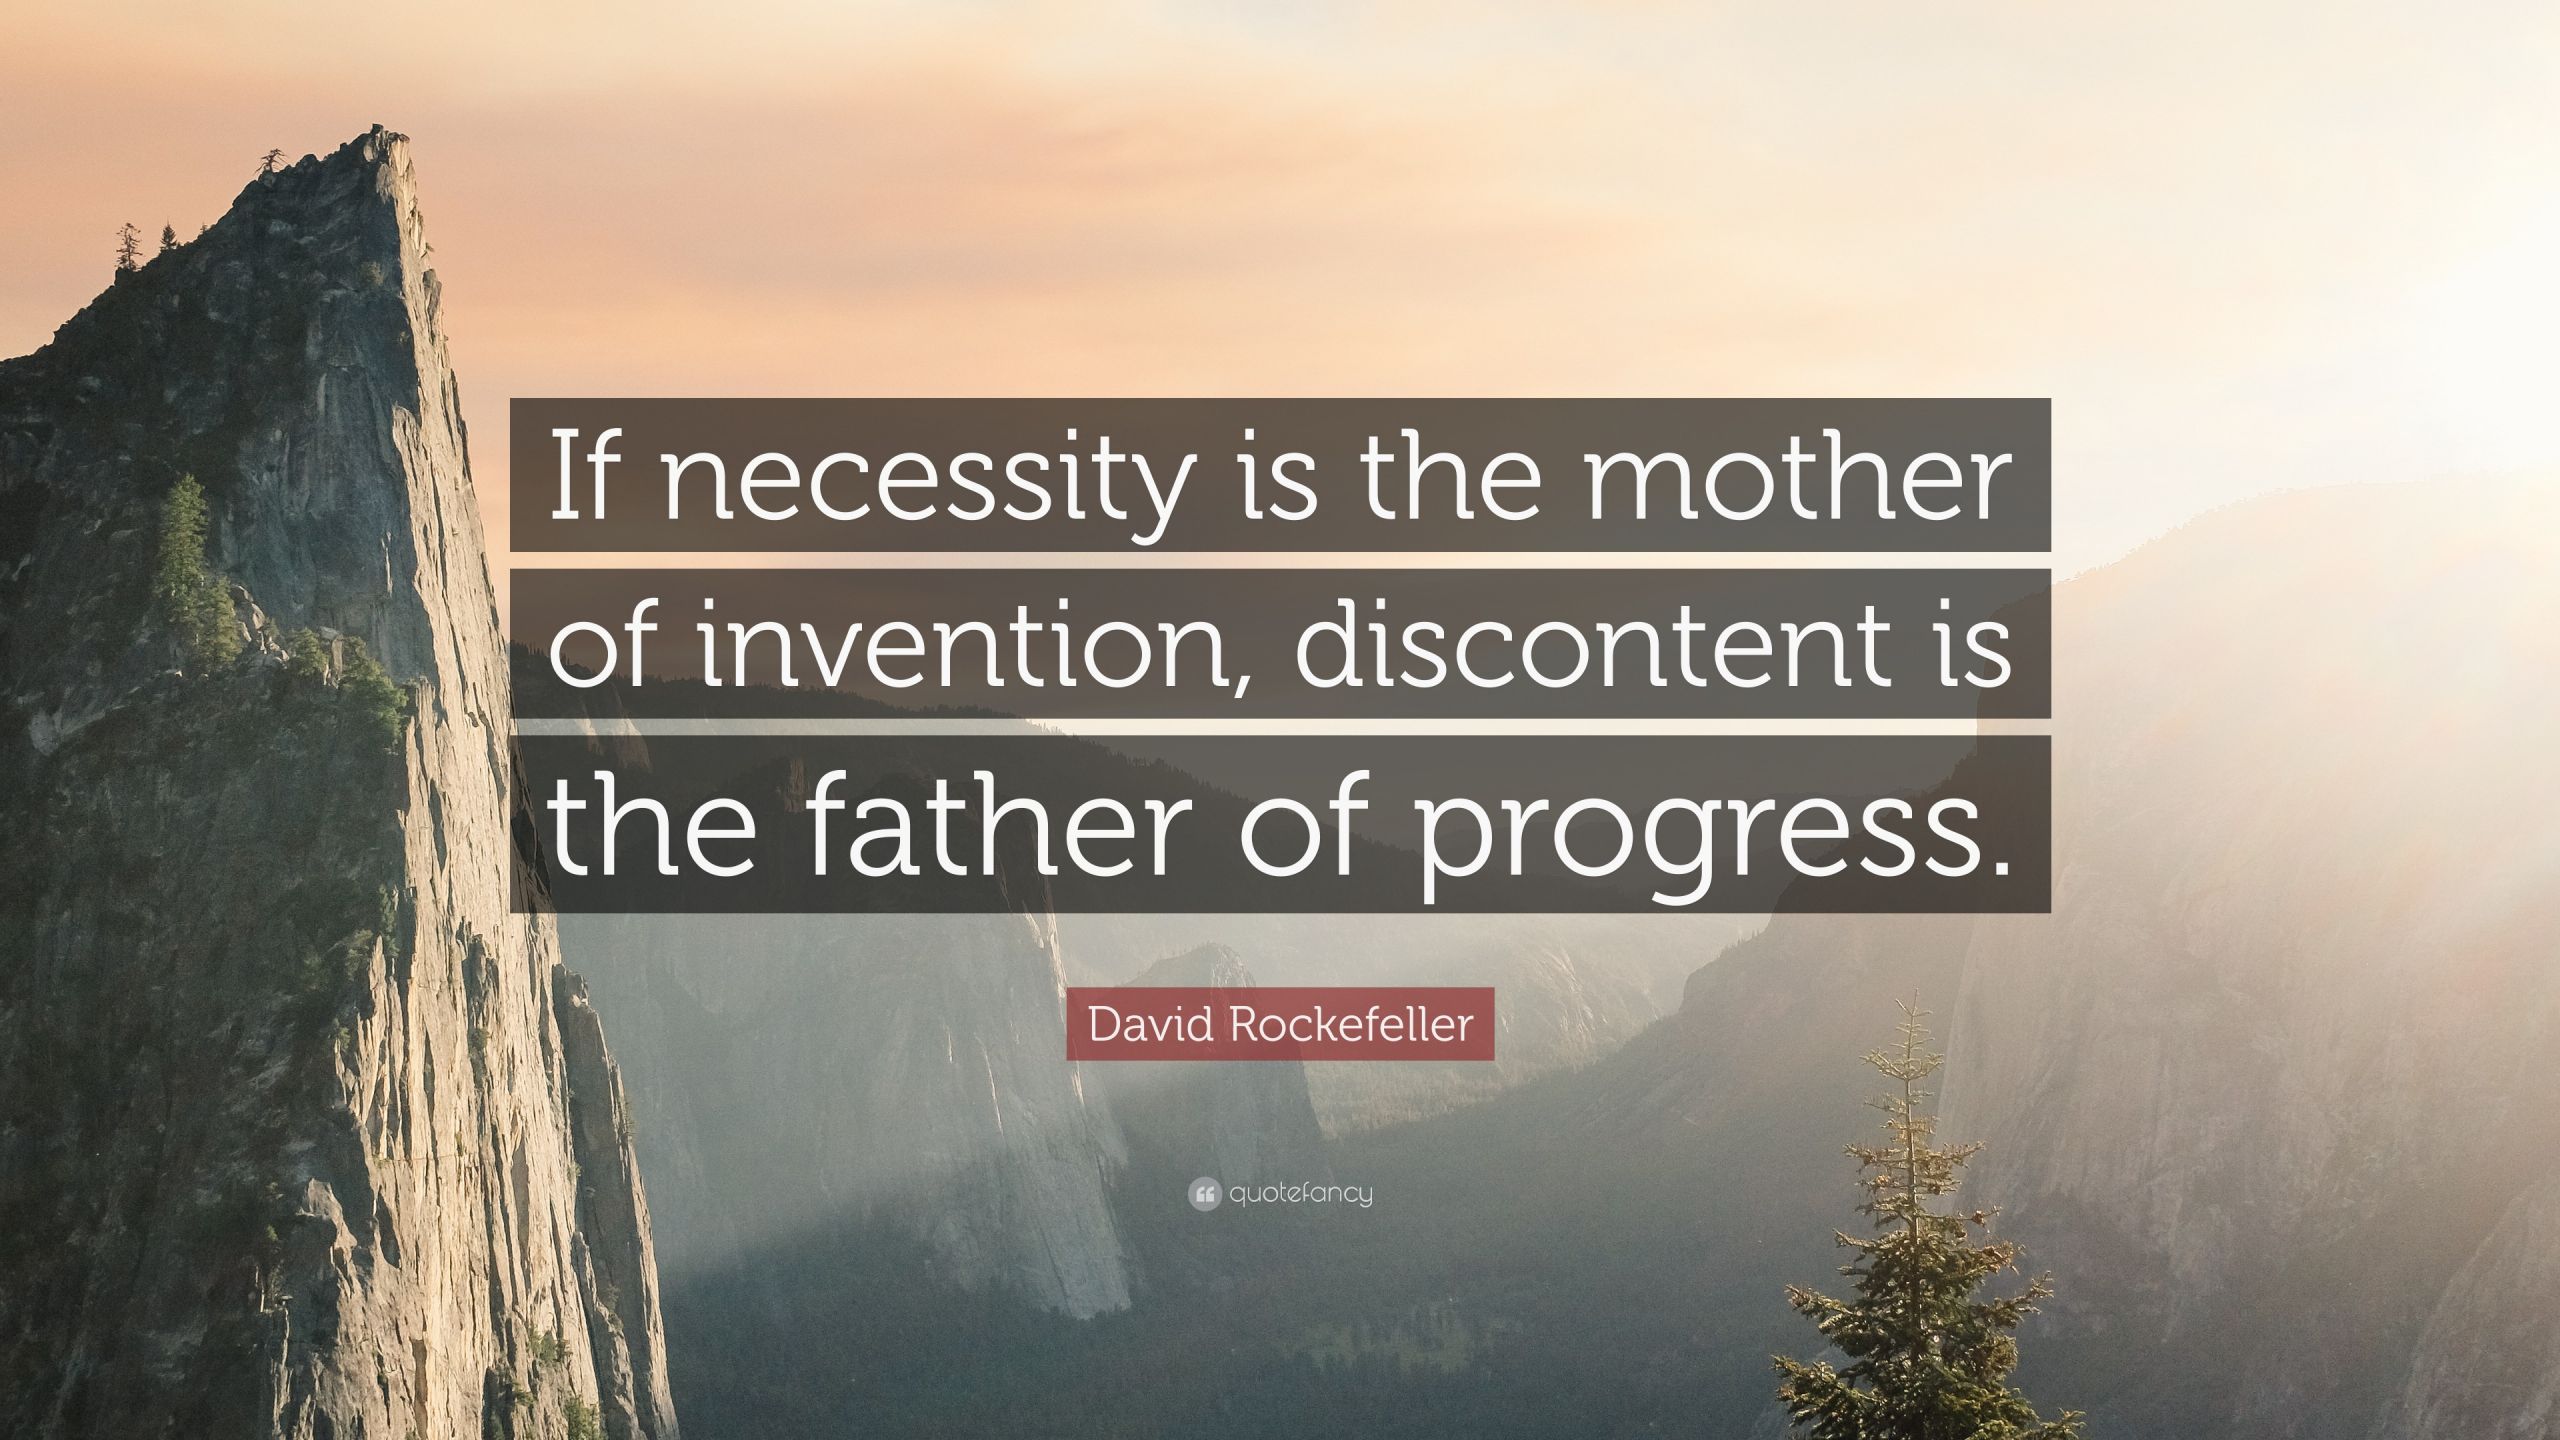 Necessity Is The Mother Of Invention Quote
 David Rockefeller Quote “If necessity is the mother of